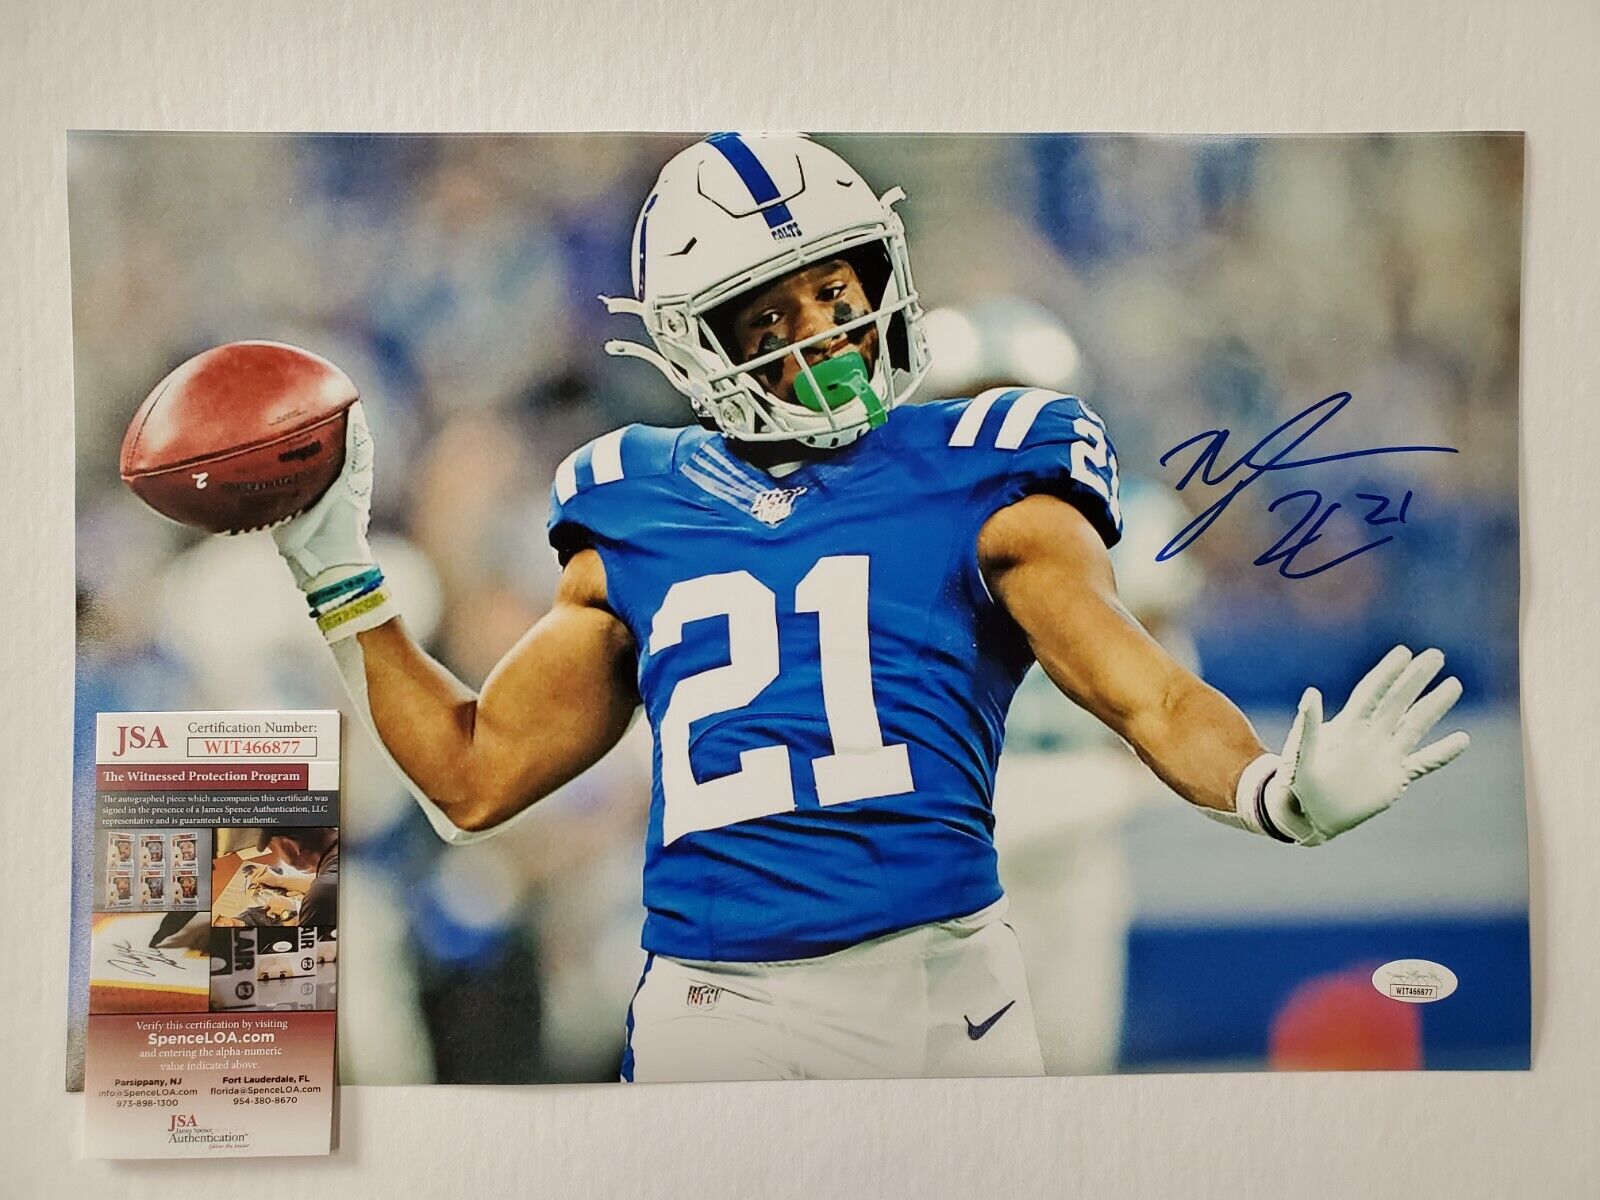 MVP Authentics Indianapolis Colts Nyheim Hines Autographed Signed 11X17 Photo Jsa Coa 71.10 sports jersey framing , jersey framing